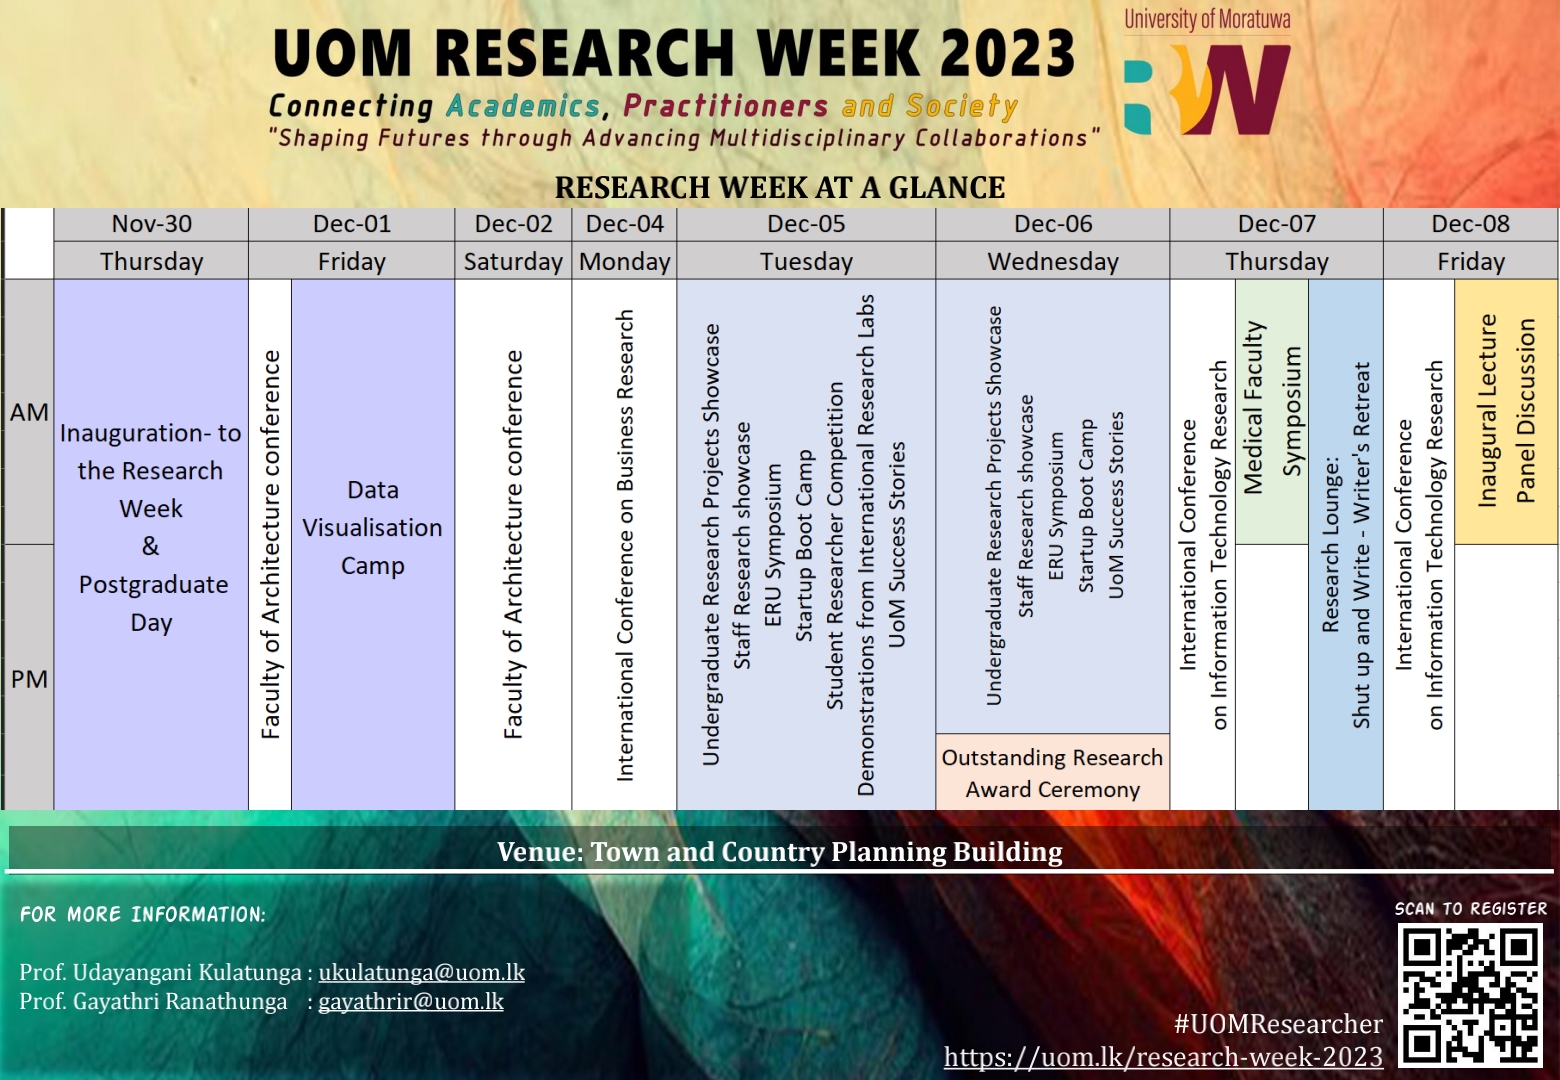 Research Week at a glance